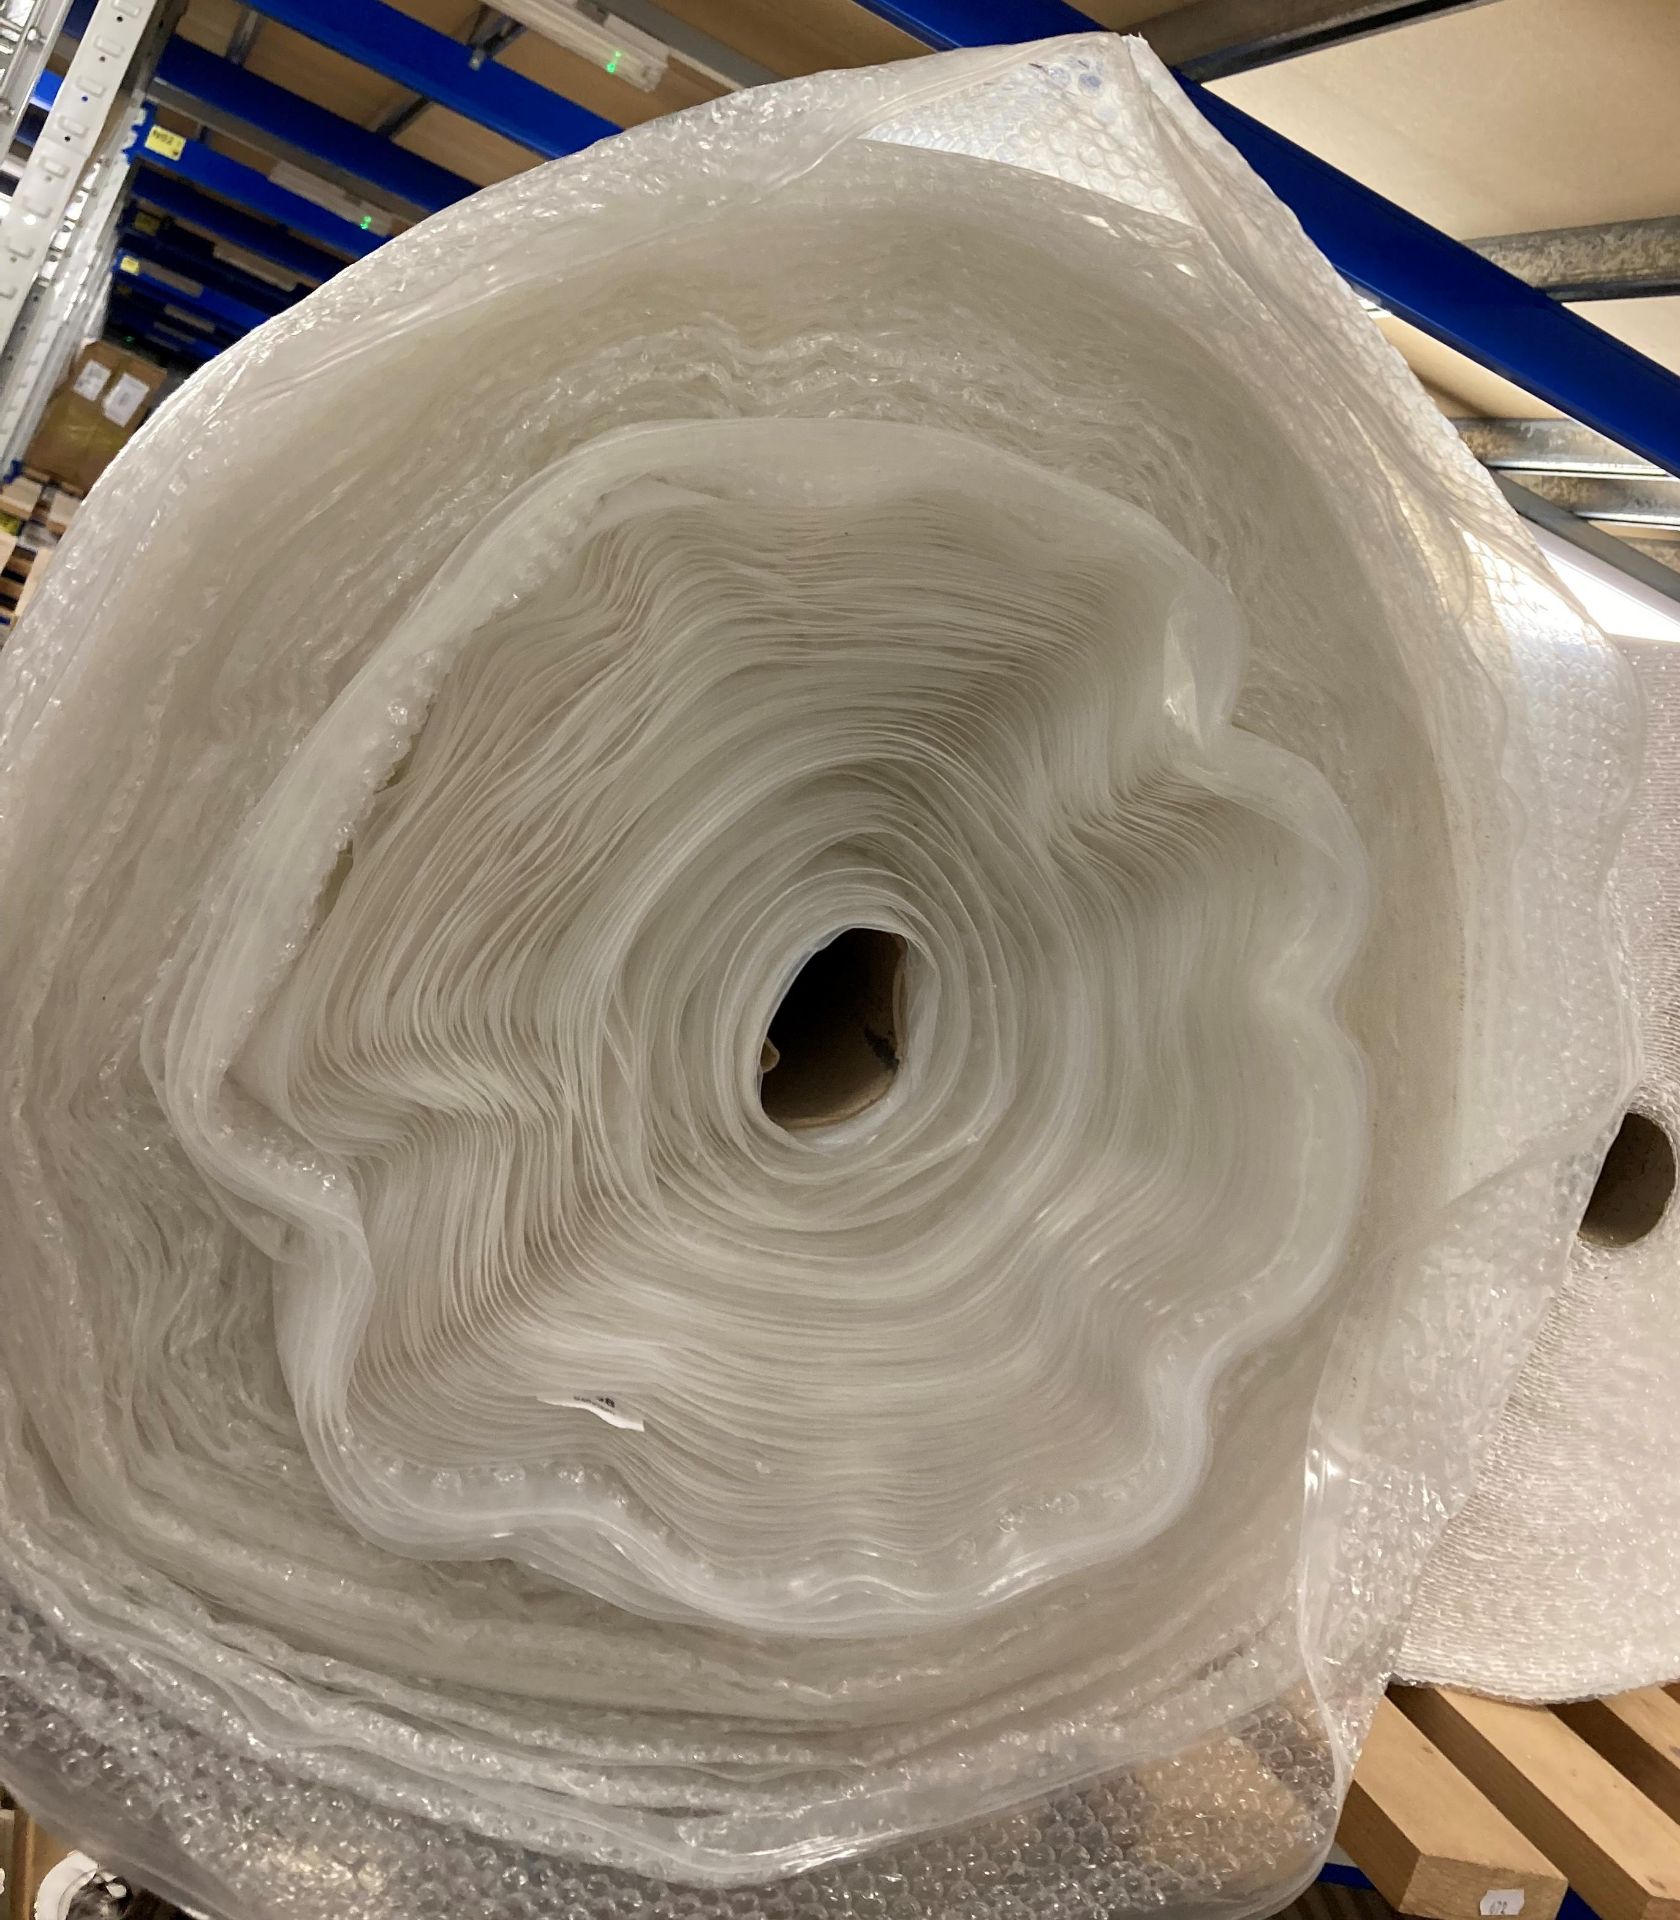 Large roll of bubble wrap (saleroom location: TOP T02)